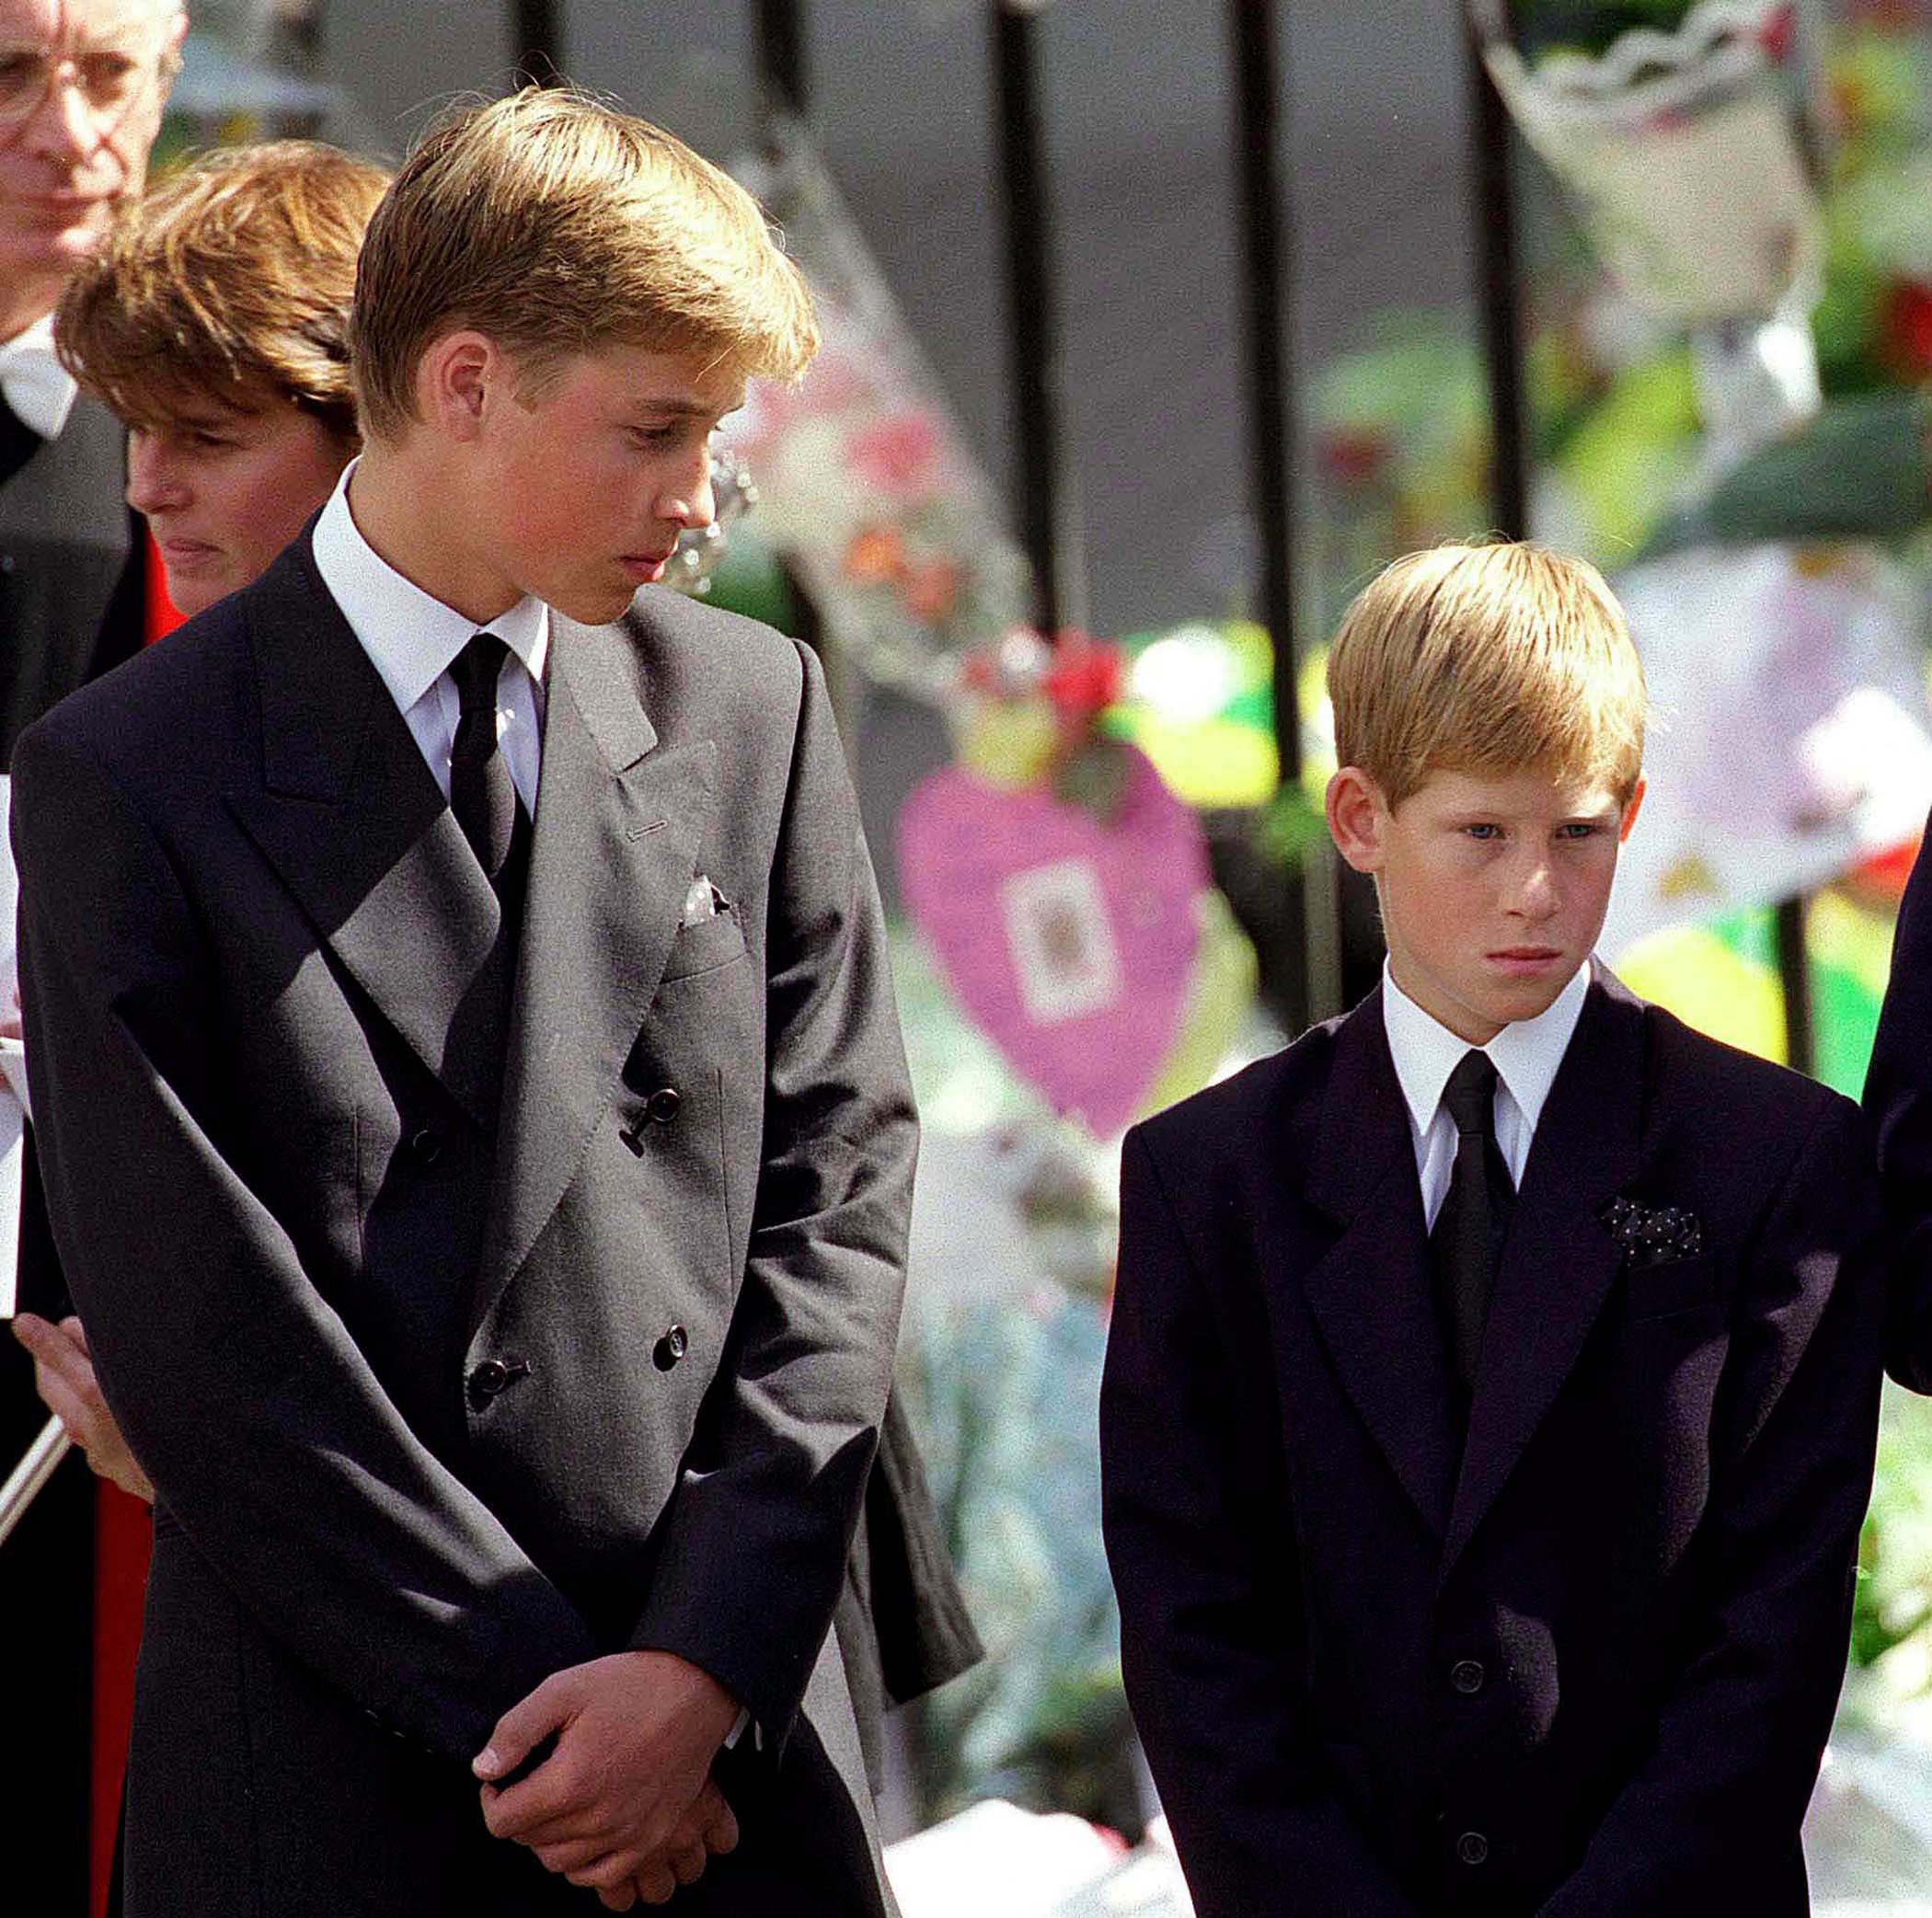 Prince William and Prince Harry stand outside Westminster Abbey at the funeral of Diana, Princess of Wales on September 6, 1997 in London, England.  | Source: Getty Images